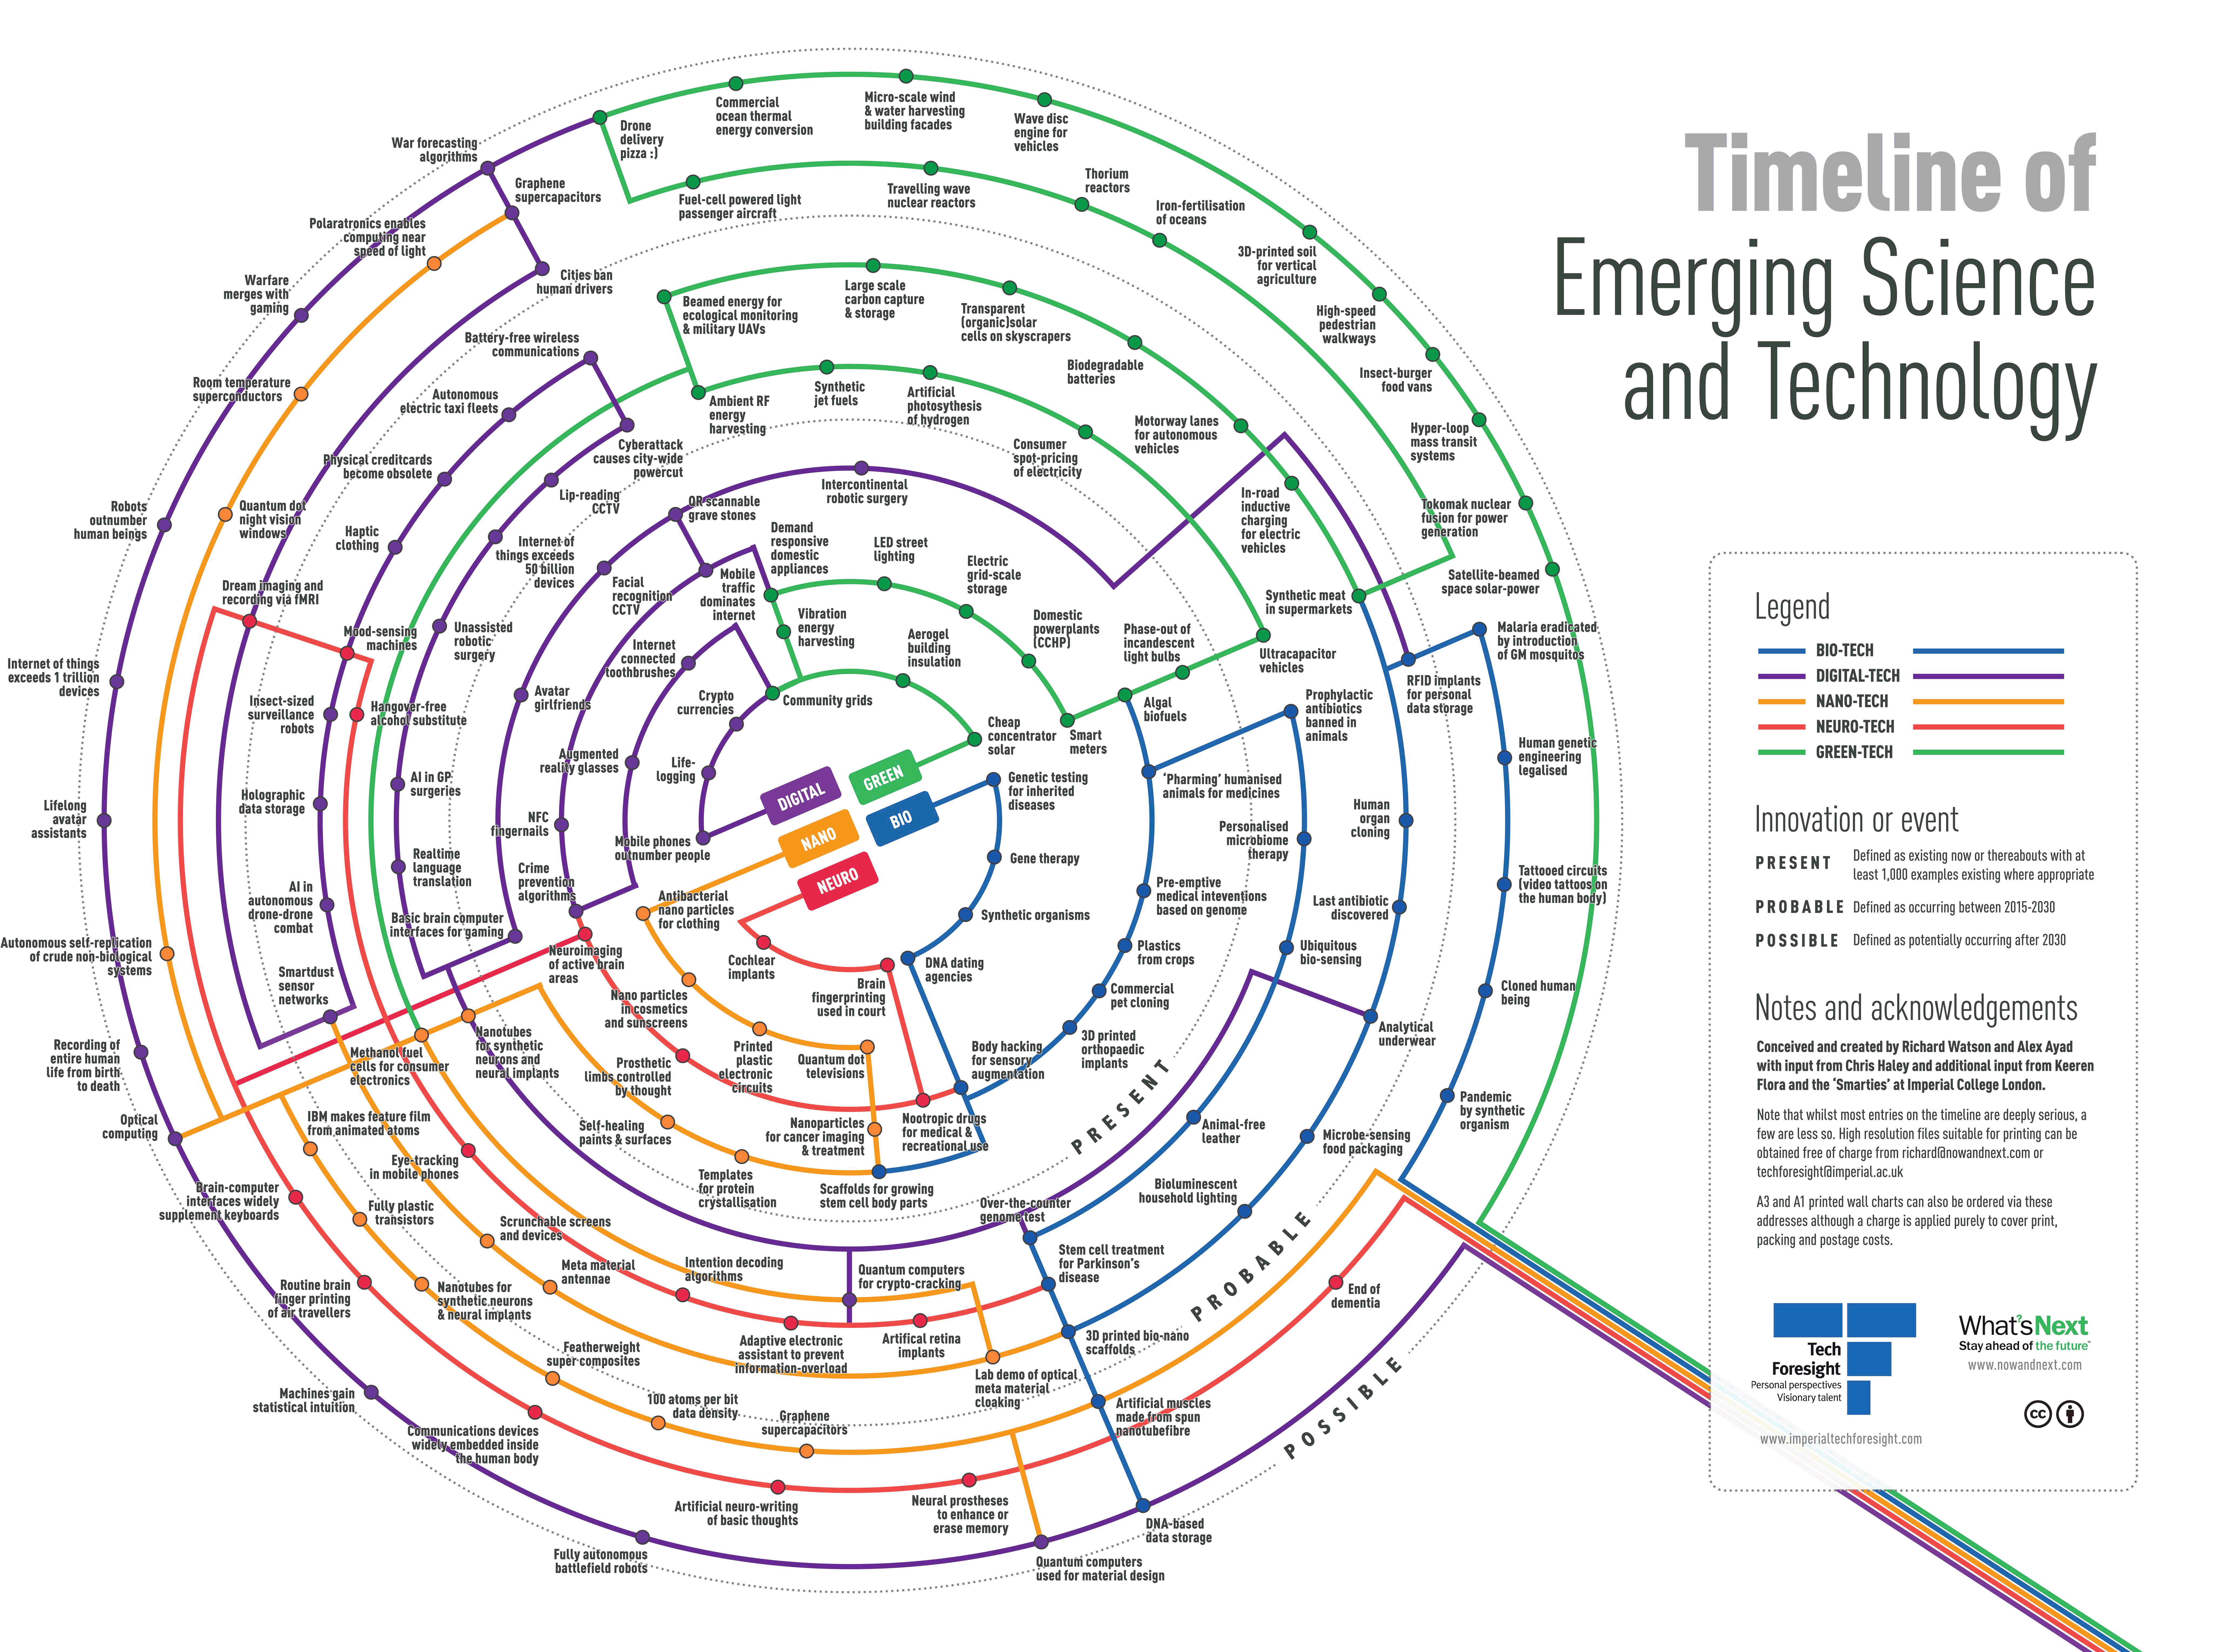 Emerging Science and Technology: 2015-2013 and Beyond